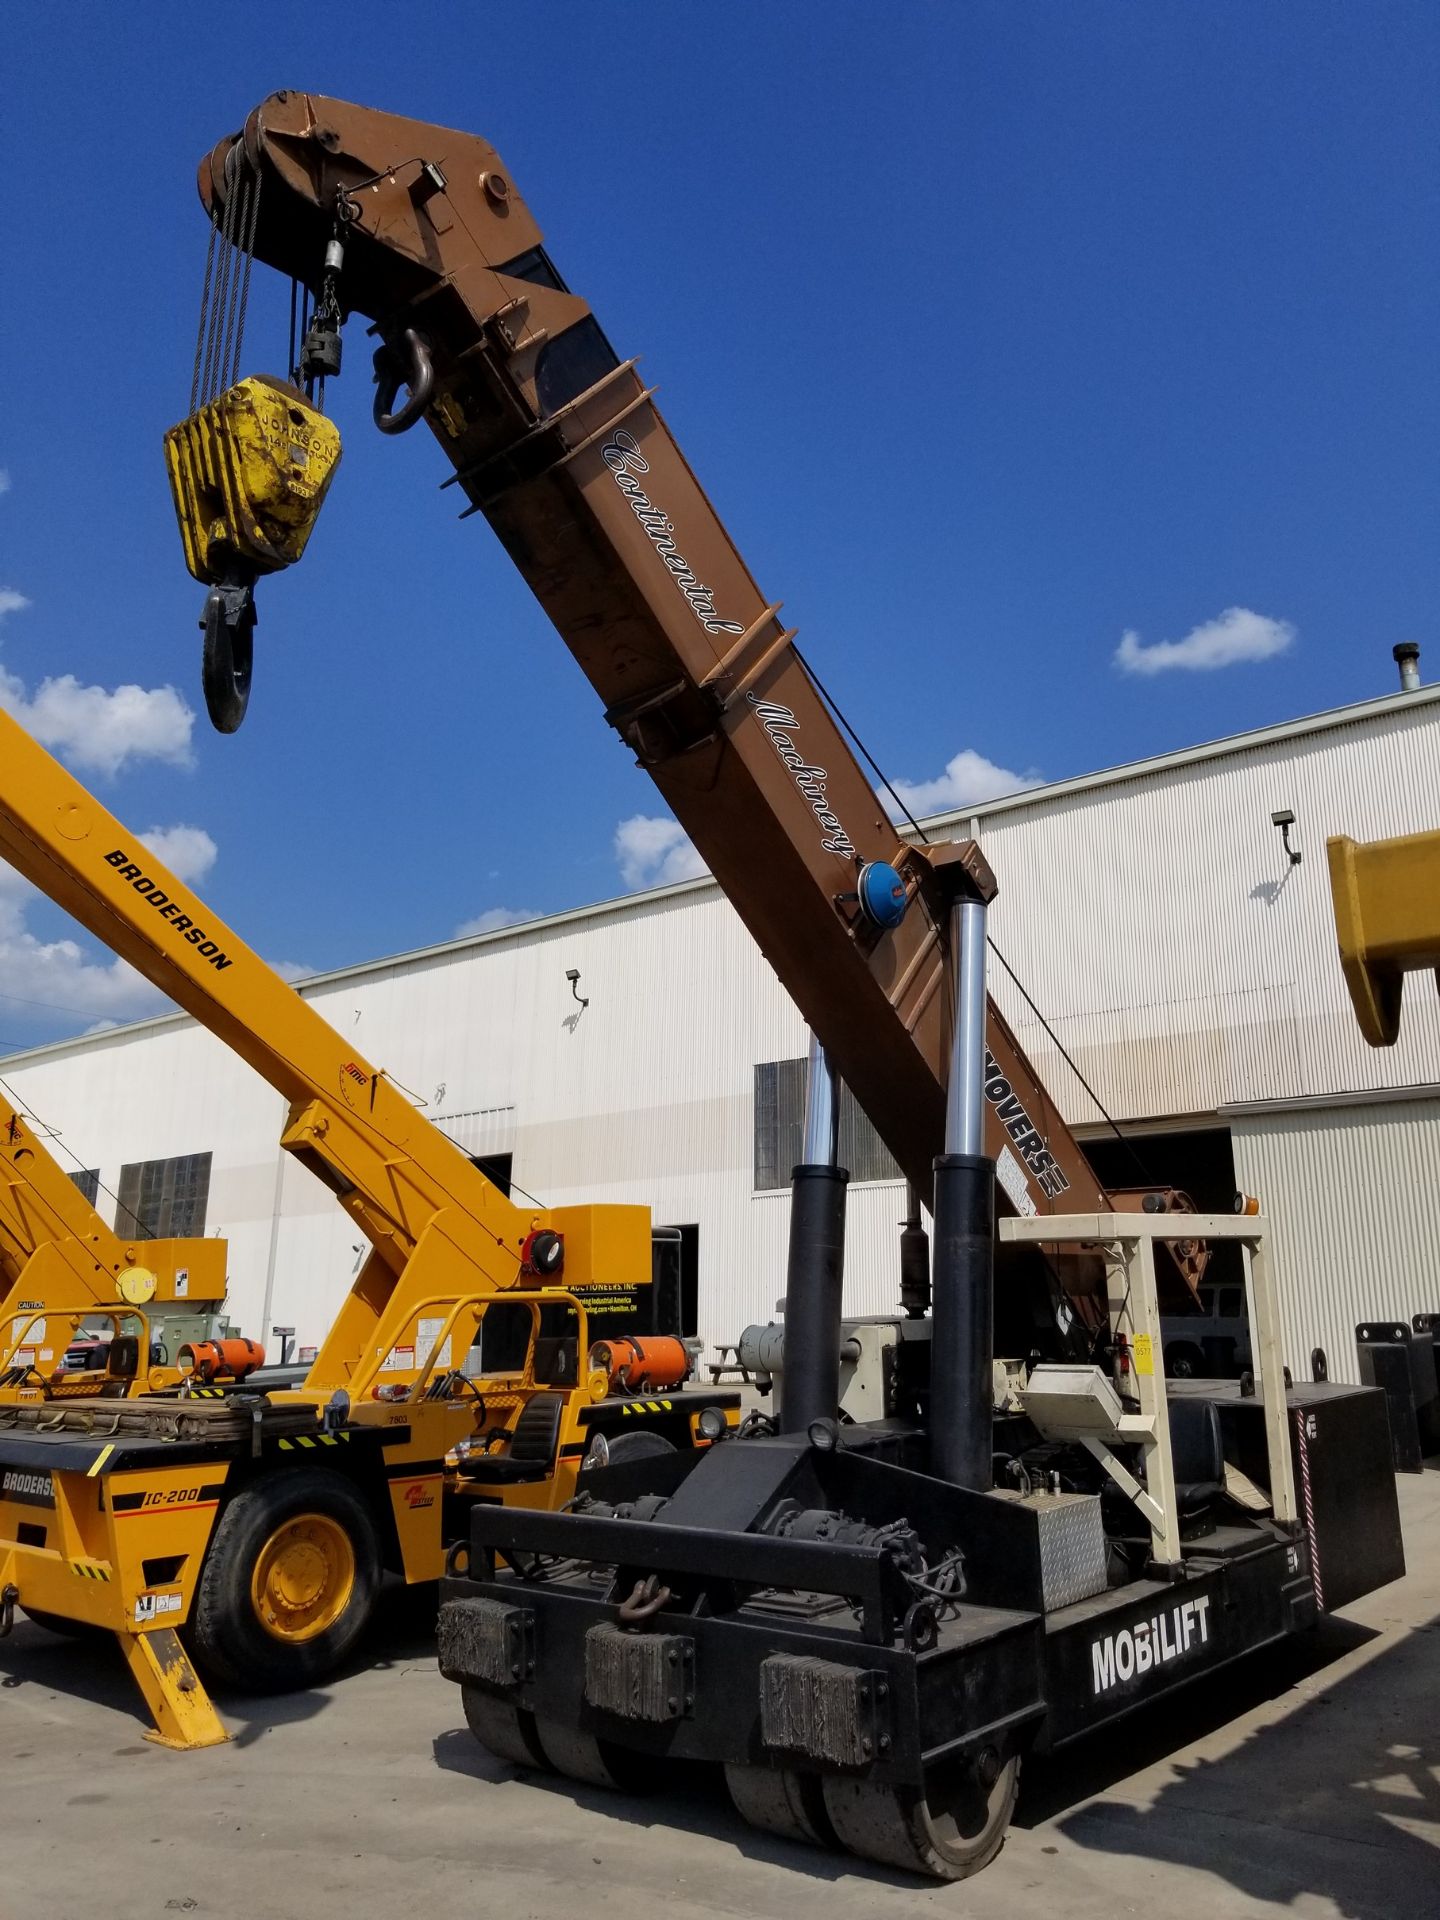 MOBILIFT 75-TON HYDRAULIC MOBILE CRANE; MODEL MBL075, S/N MBL07500, 1,928 HOURS, NEW CABLE - Image 2 of 4